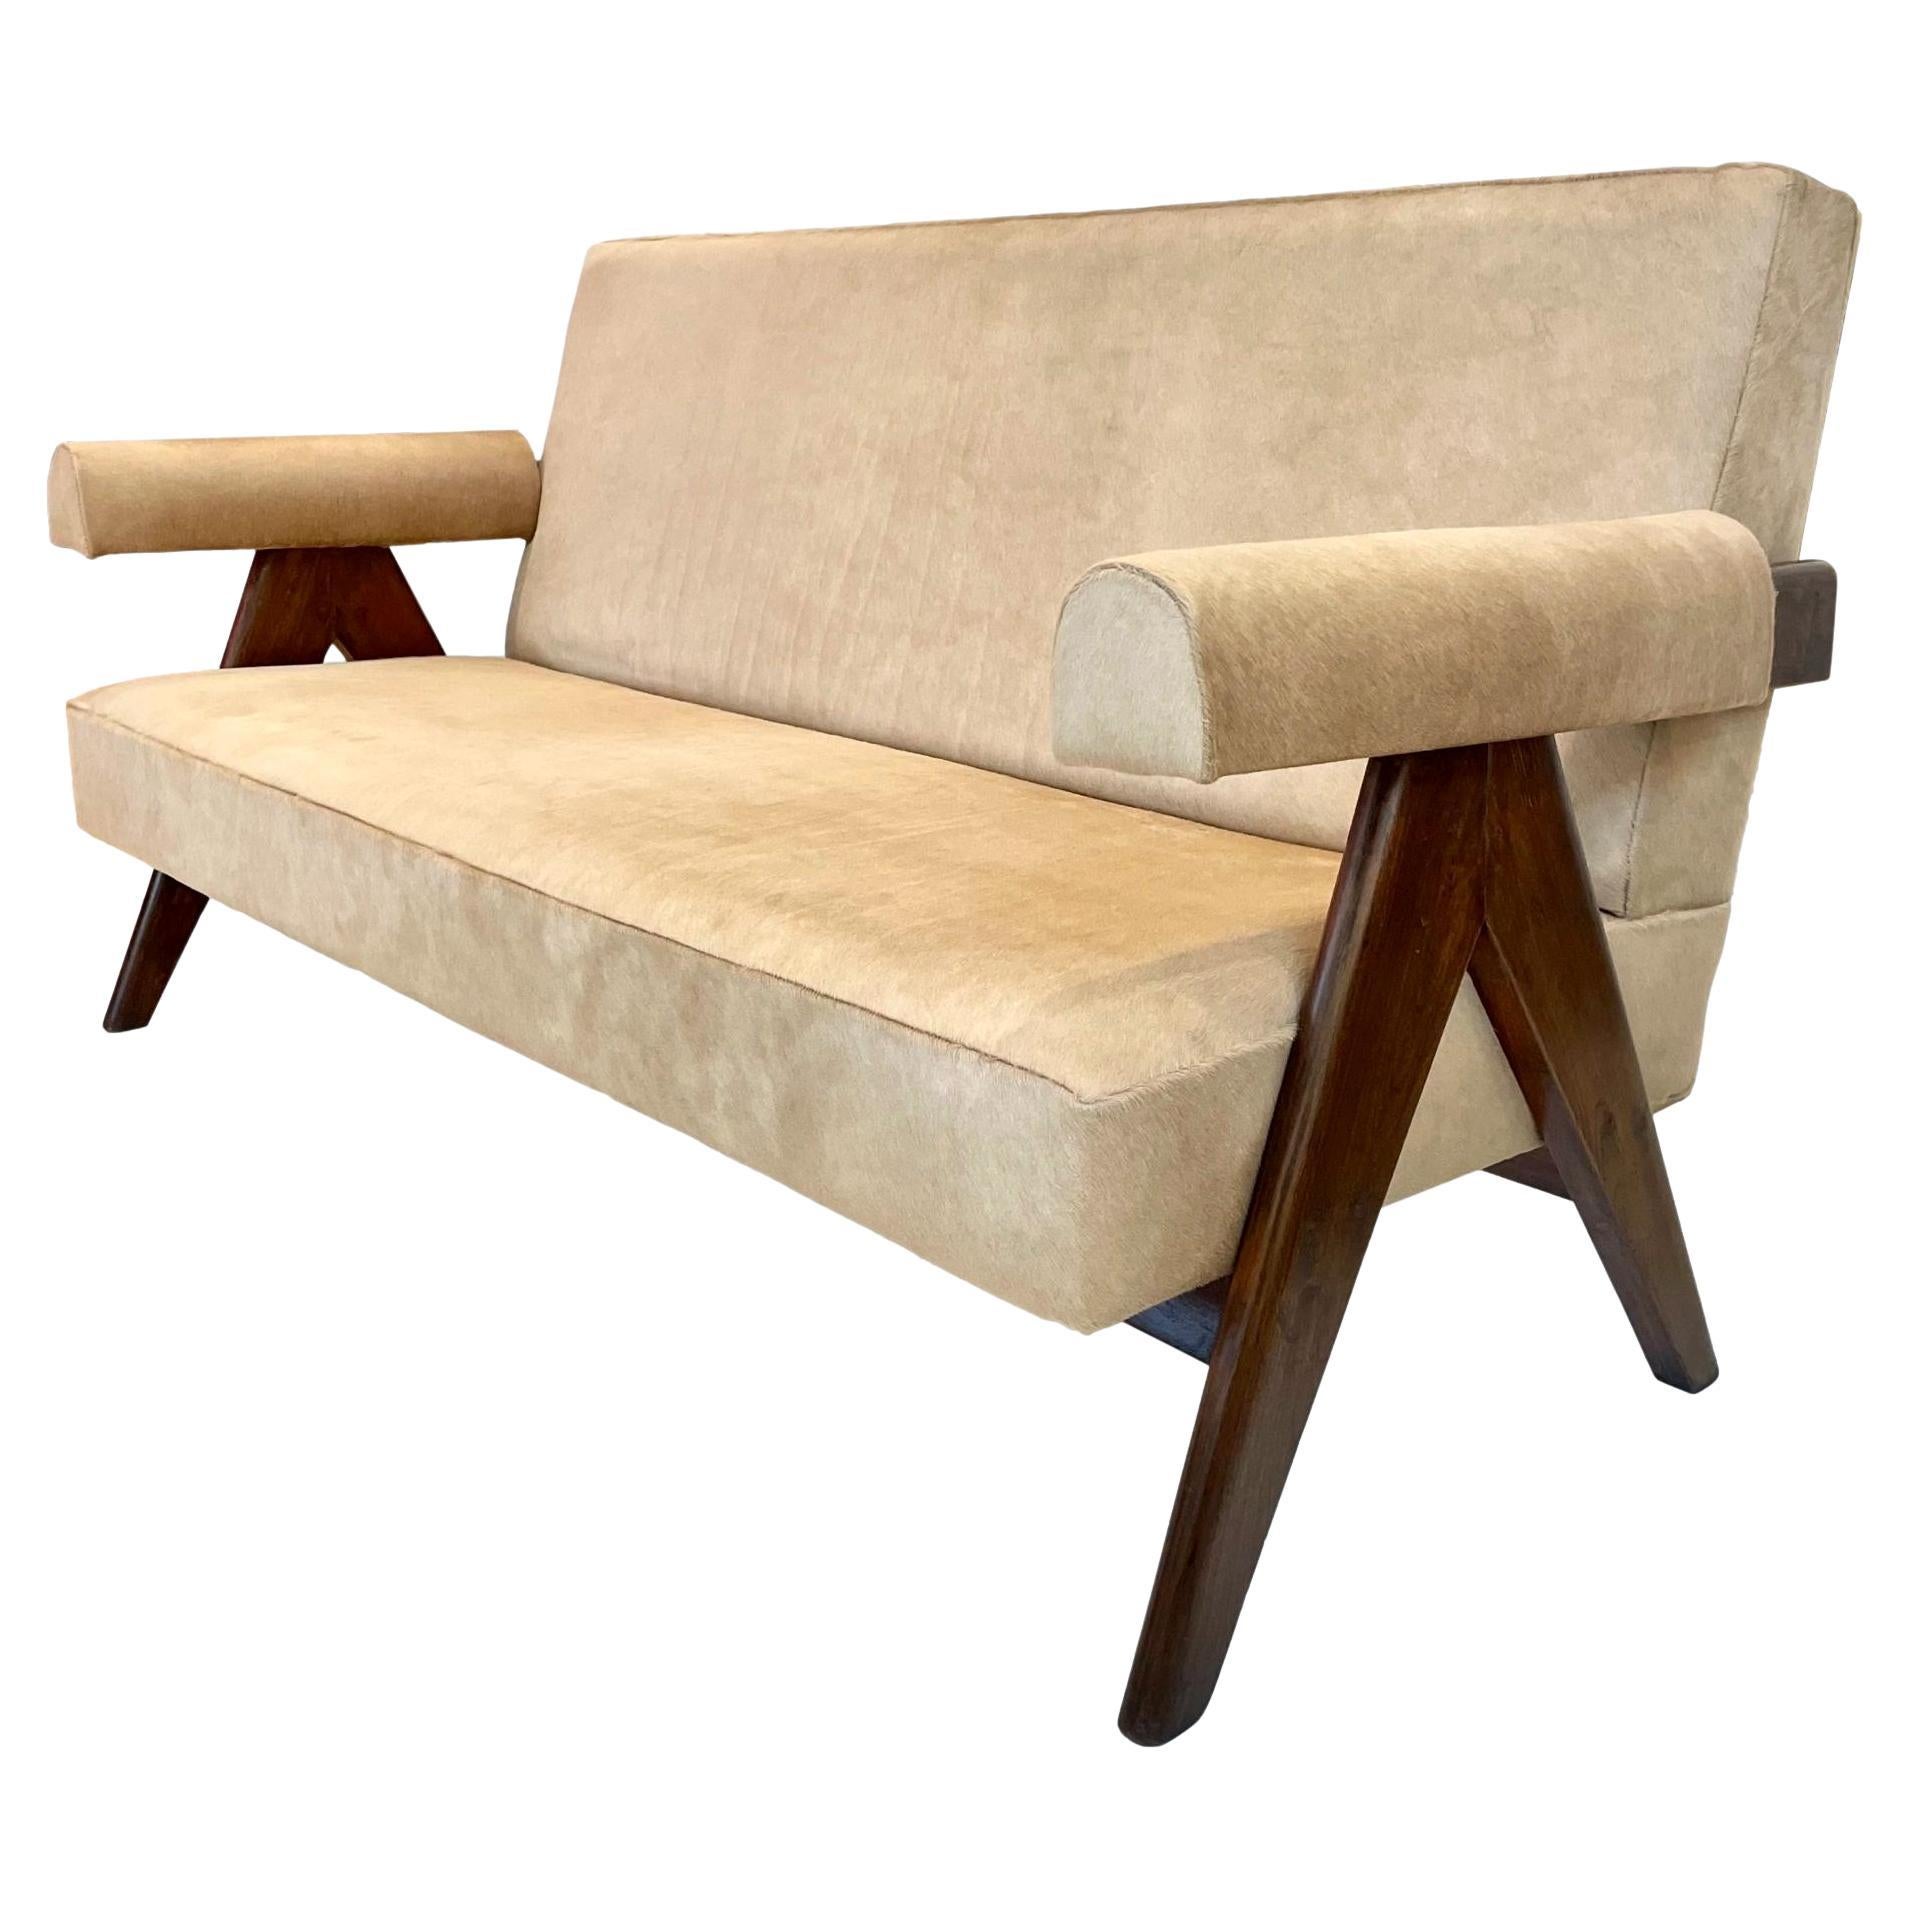 Pierre Jeanneret X-Leg Sofa in Cowhide, 1950s Chandigargh For Sale